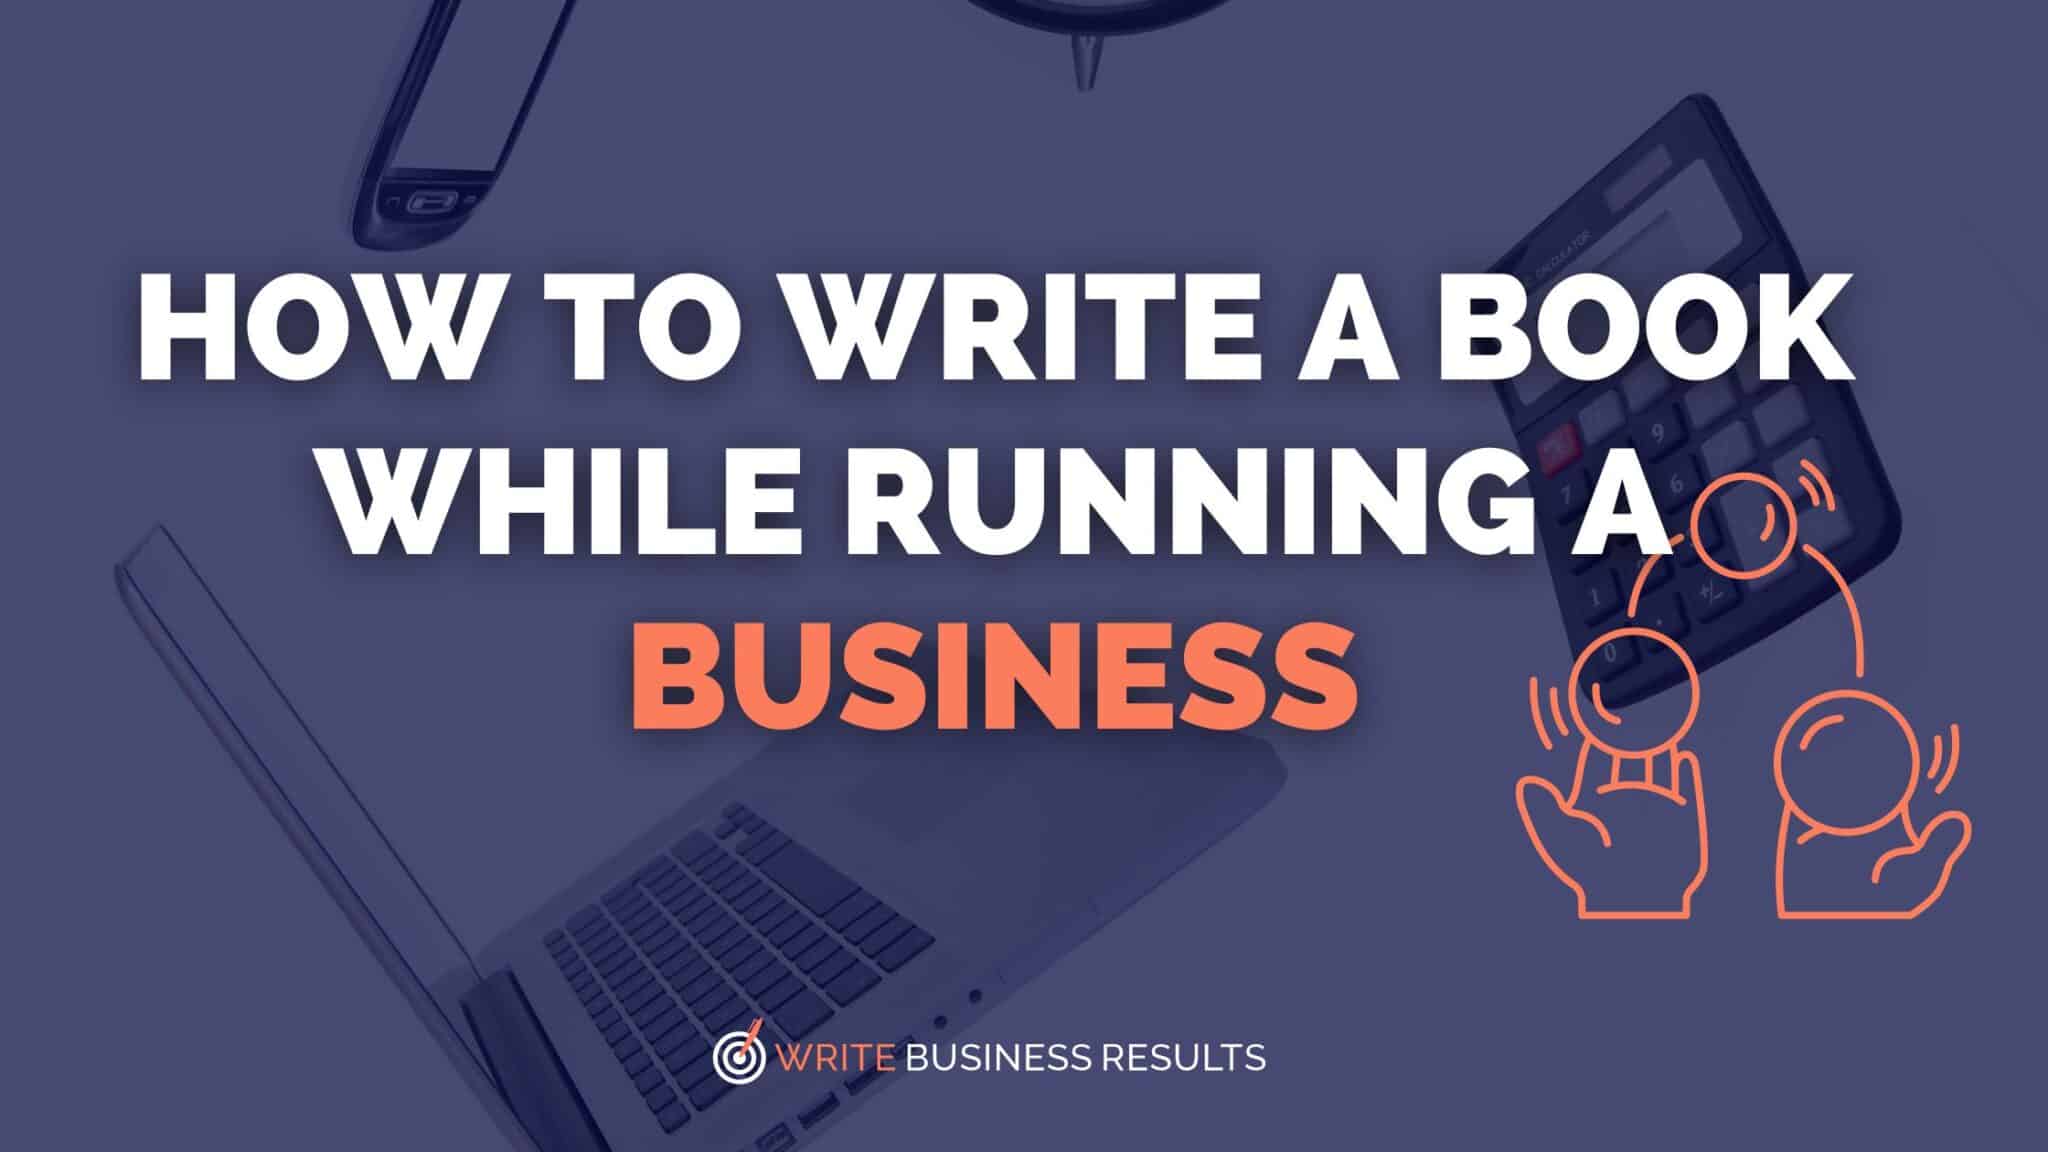 How To Write A Book While Running A Business